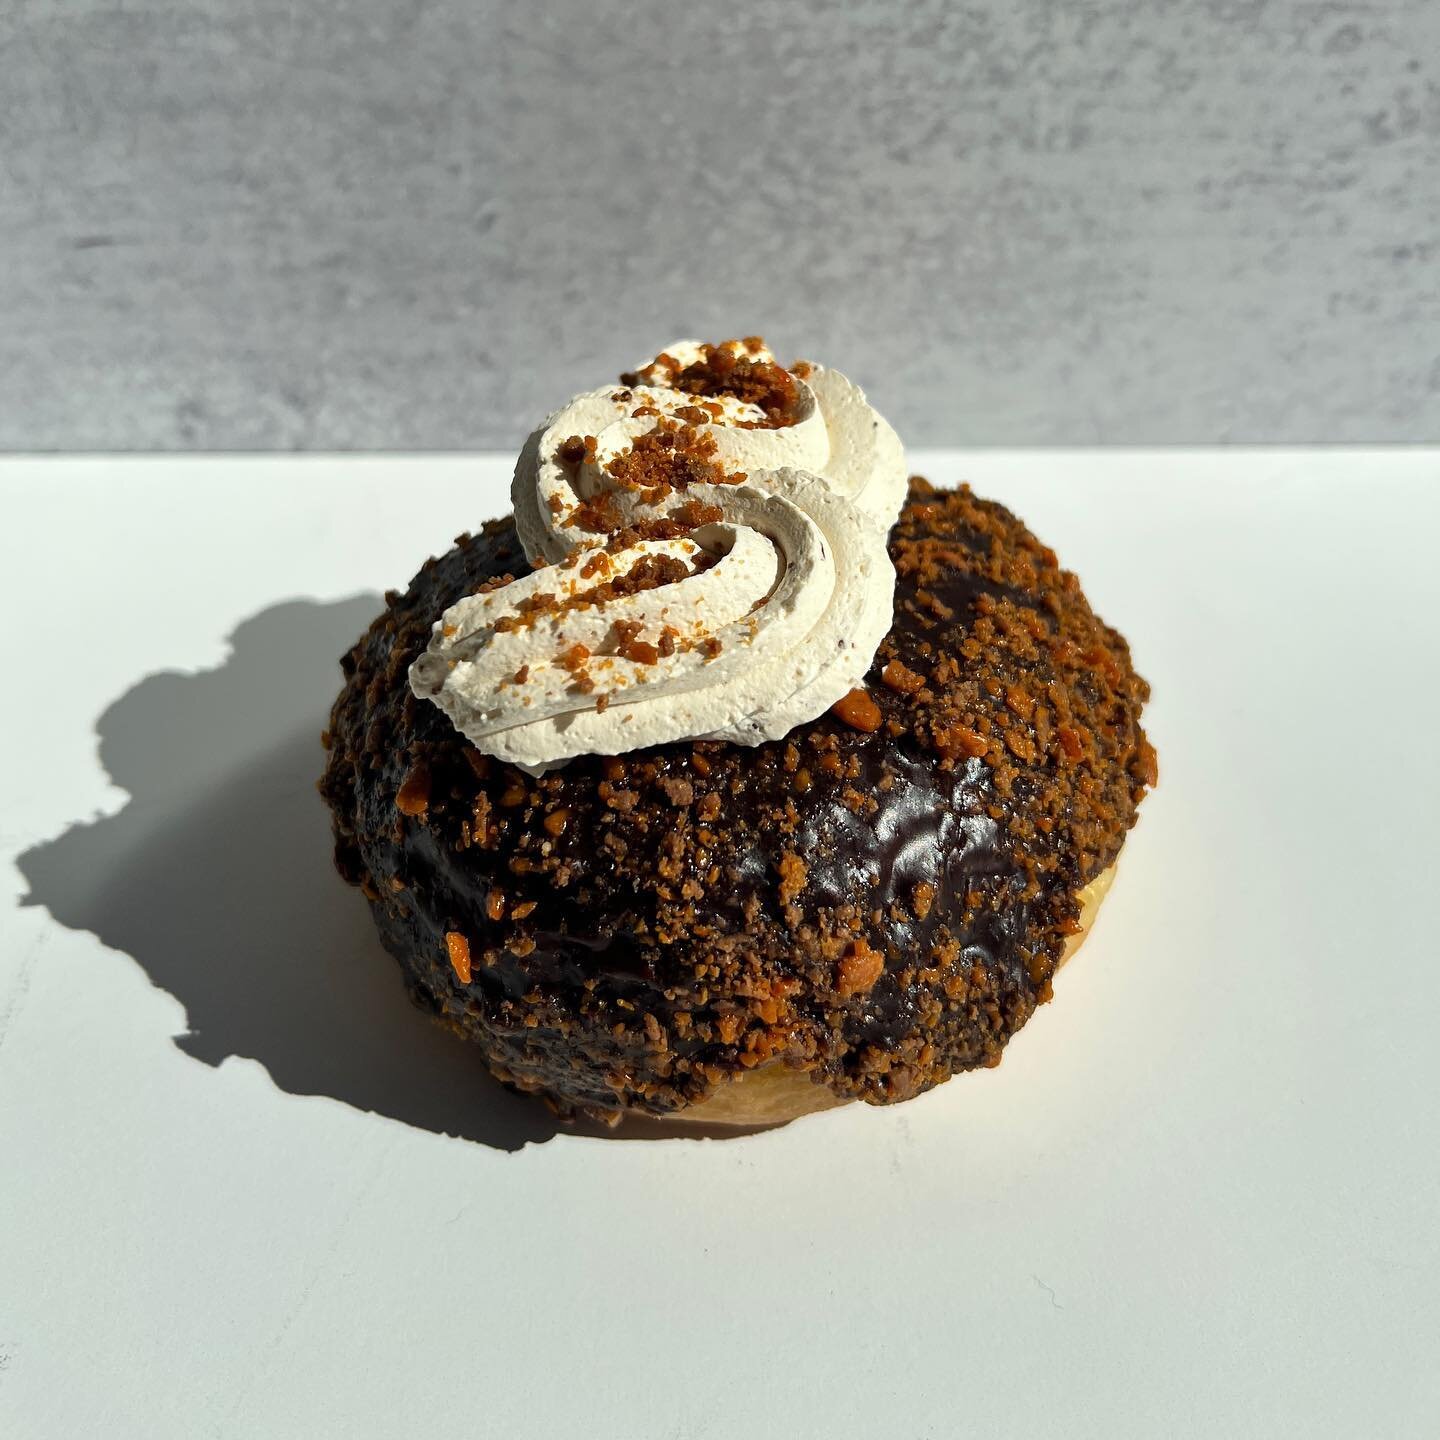 July donut of the month - Butterfinger Pie

Glazed with chocolate + peanut butter filling topped with whipped butterfinger frosting &amp; crushed butterfingers